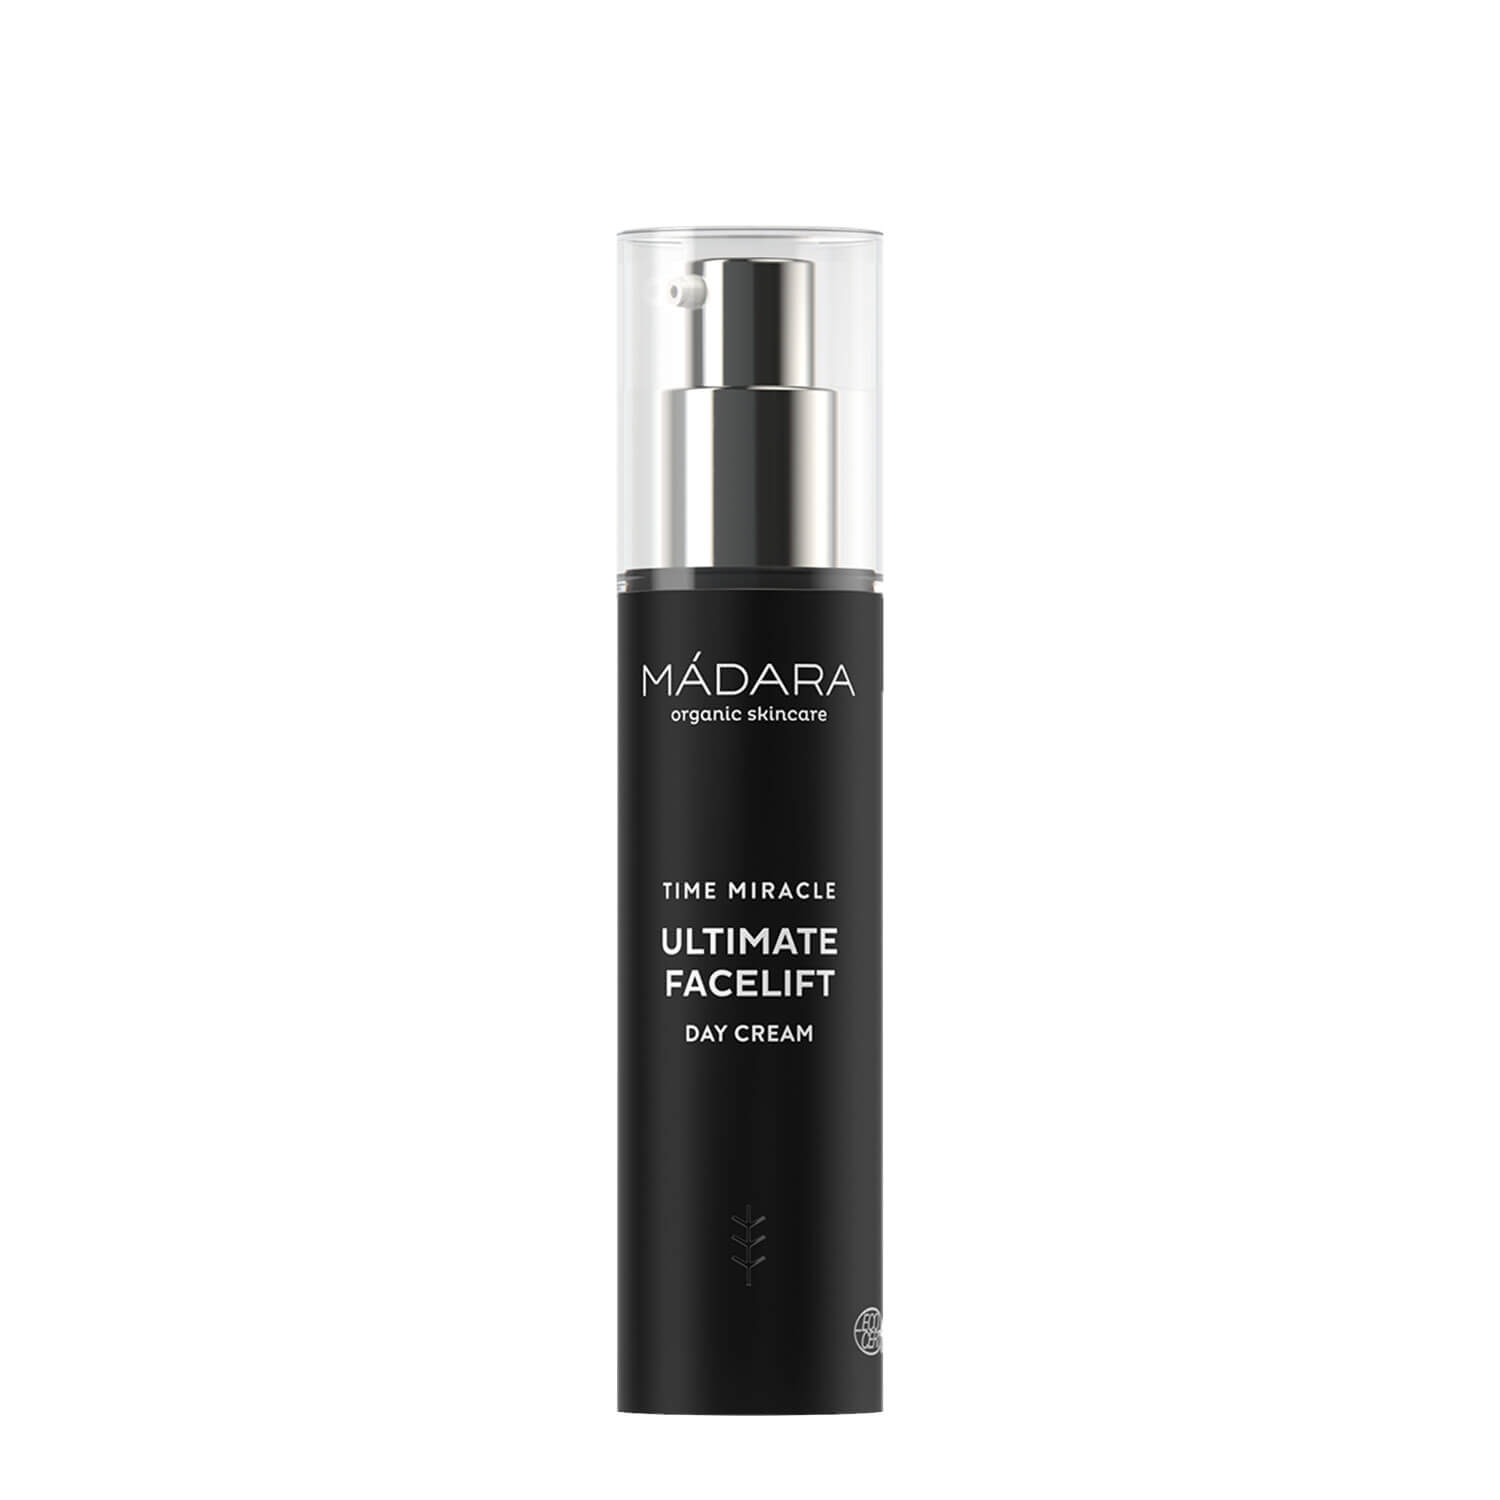 Produktbild von MÁDARA Care - Time Miracle Ultimate Facelift Day Cream